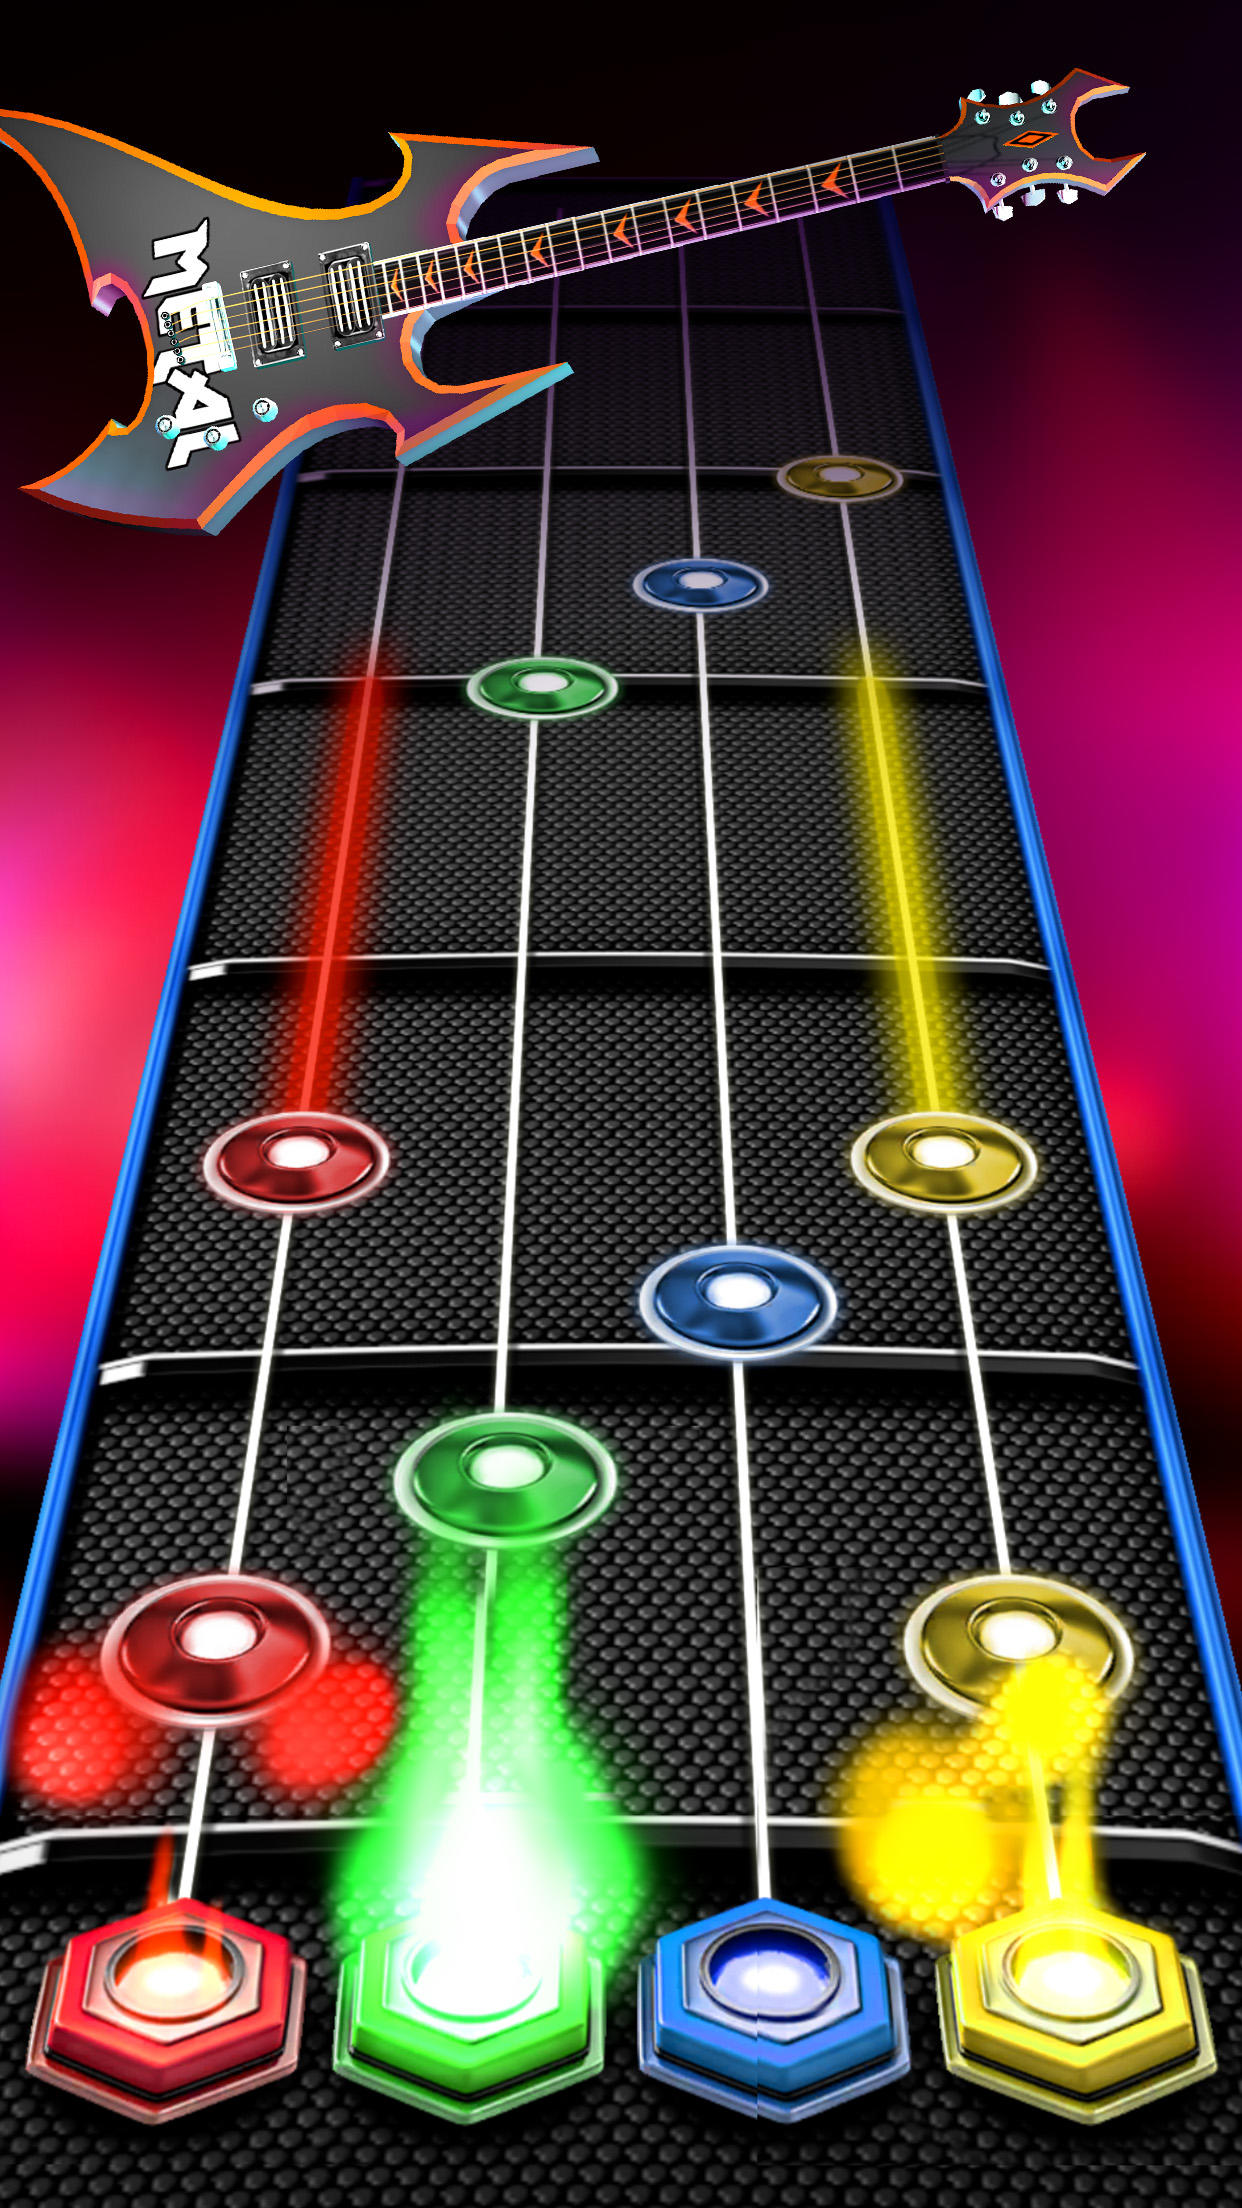 Epic Party Clicker - Music and Clicker Game for iPhone and Android